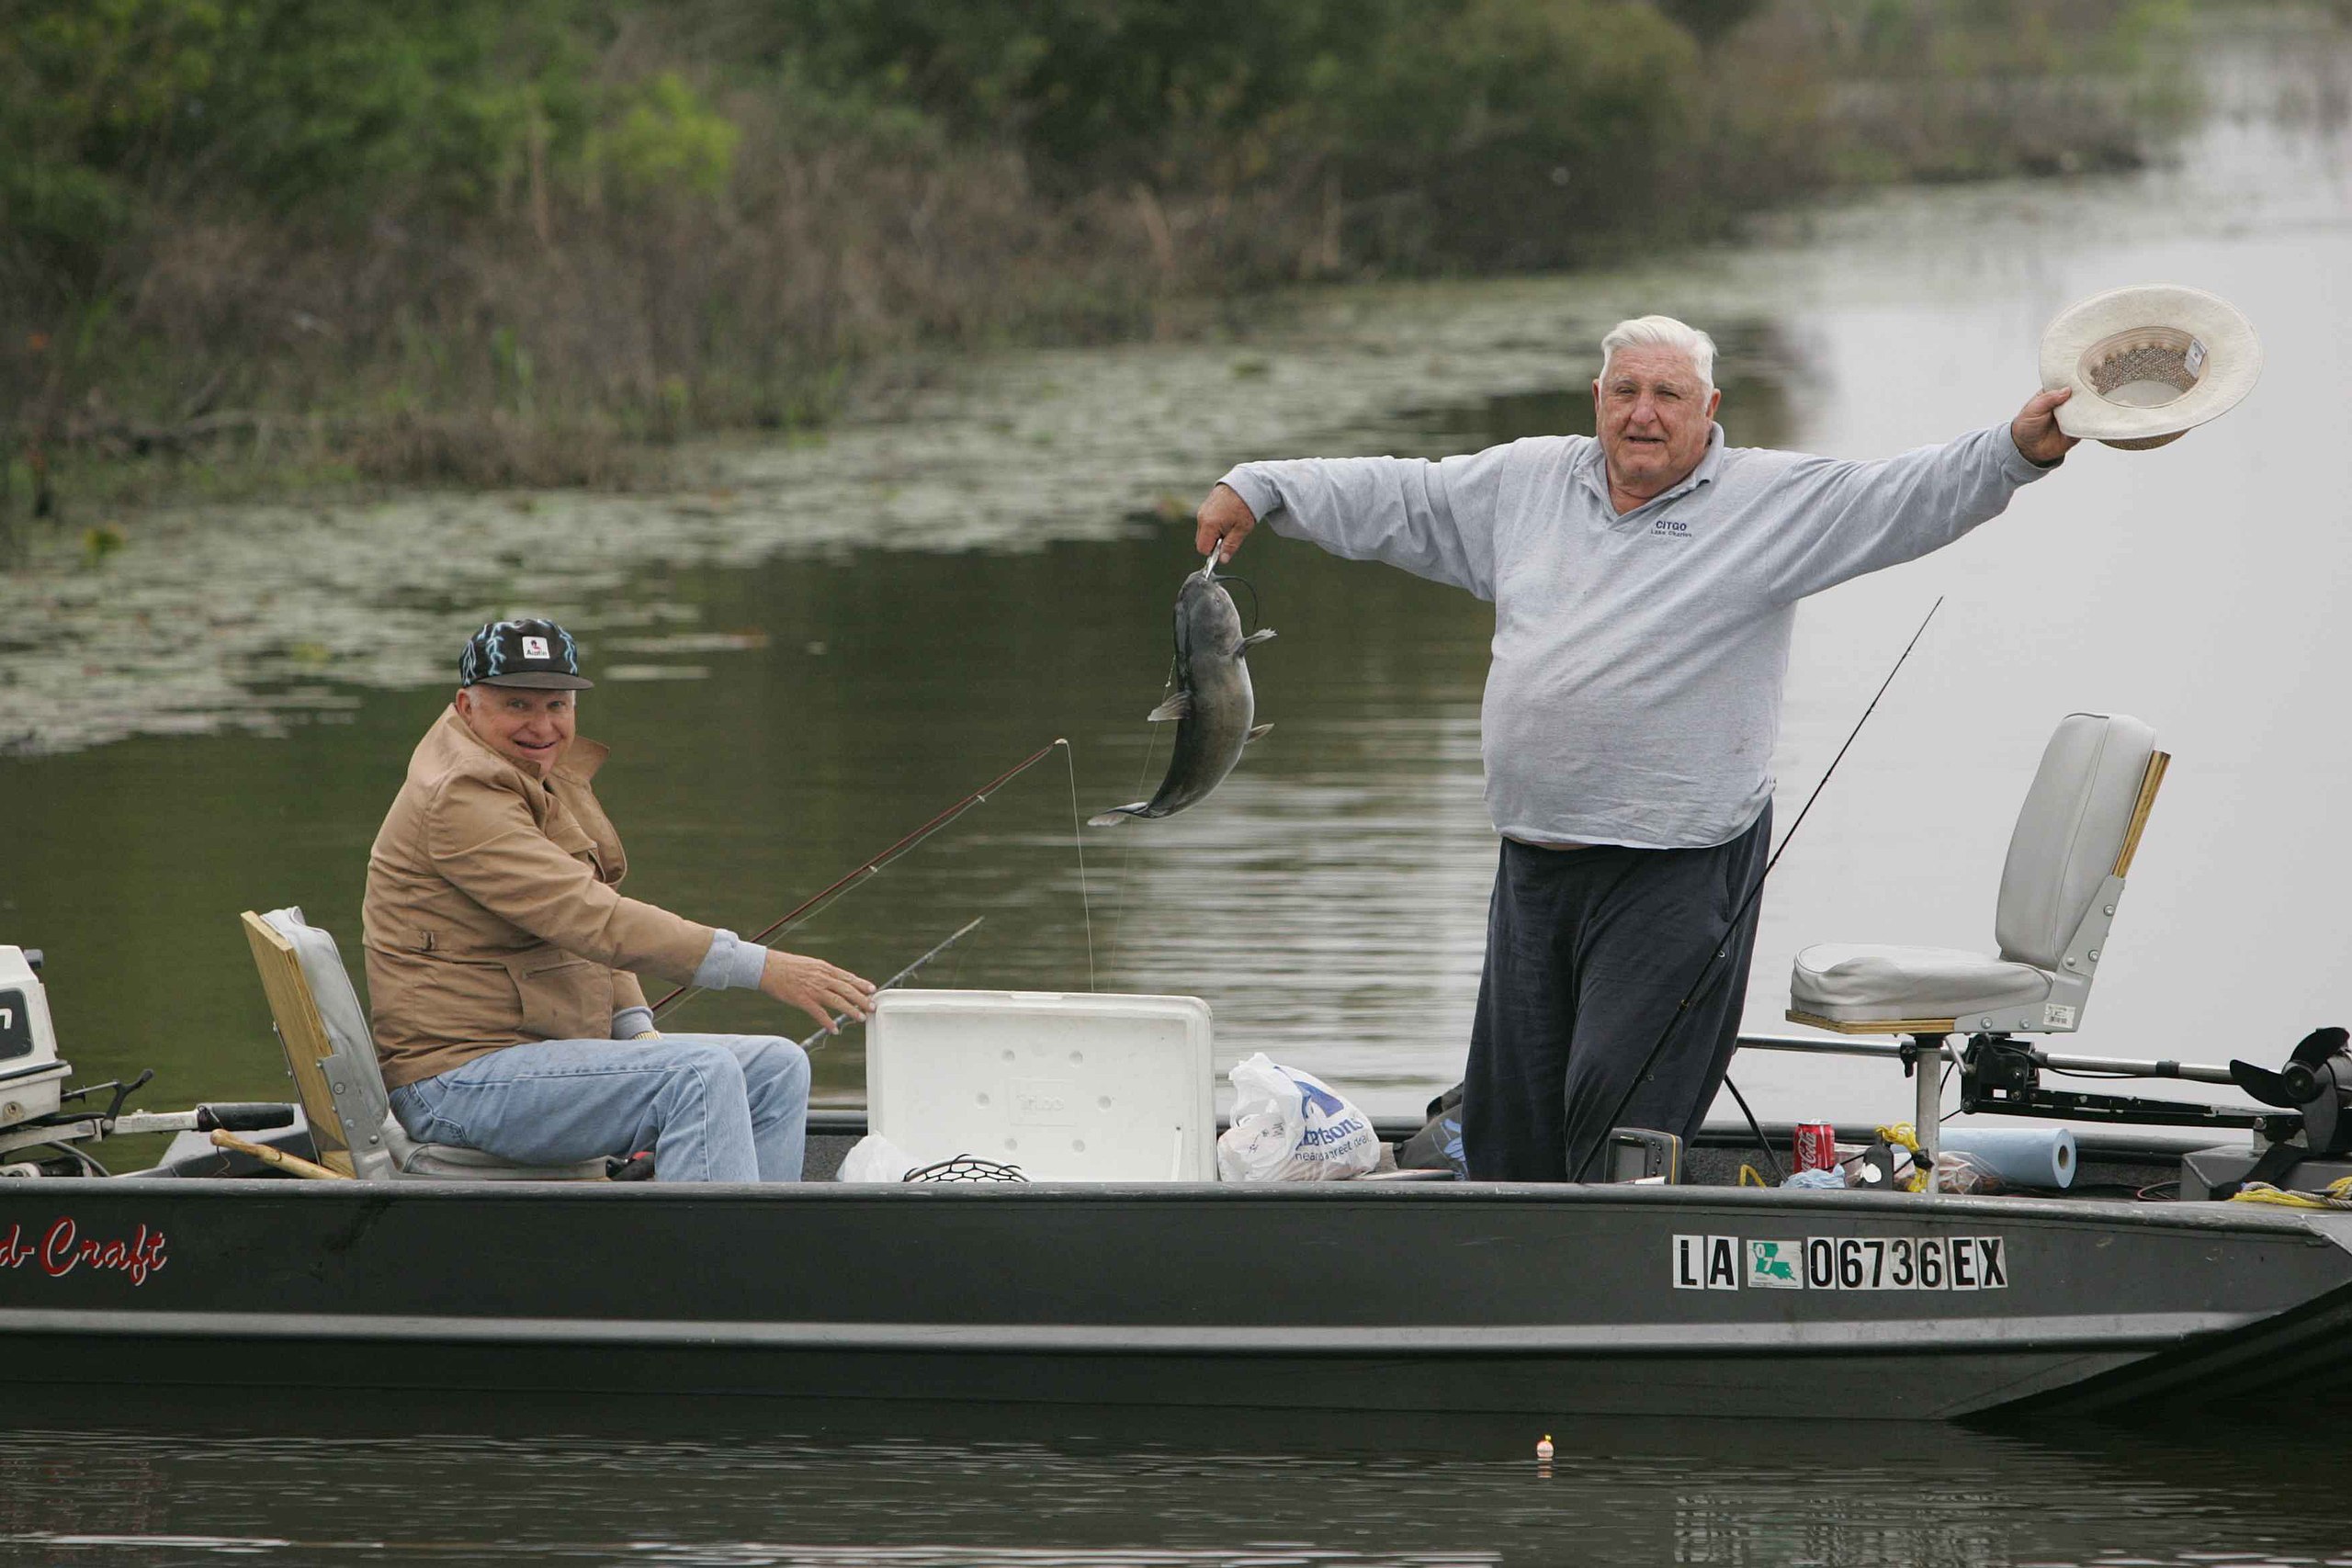 File:Two older men enjoying fishing from boat one man is standing and  raising hat while showing the fish he just caught.jpg - Wikimedia Commons